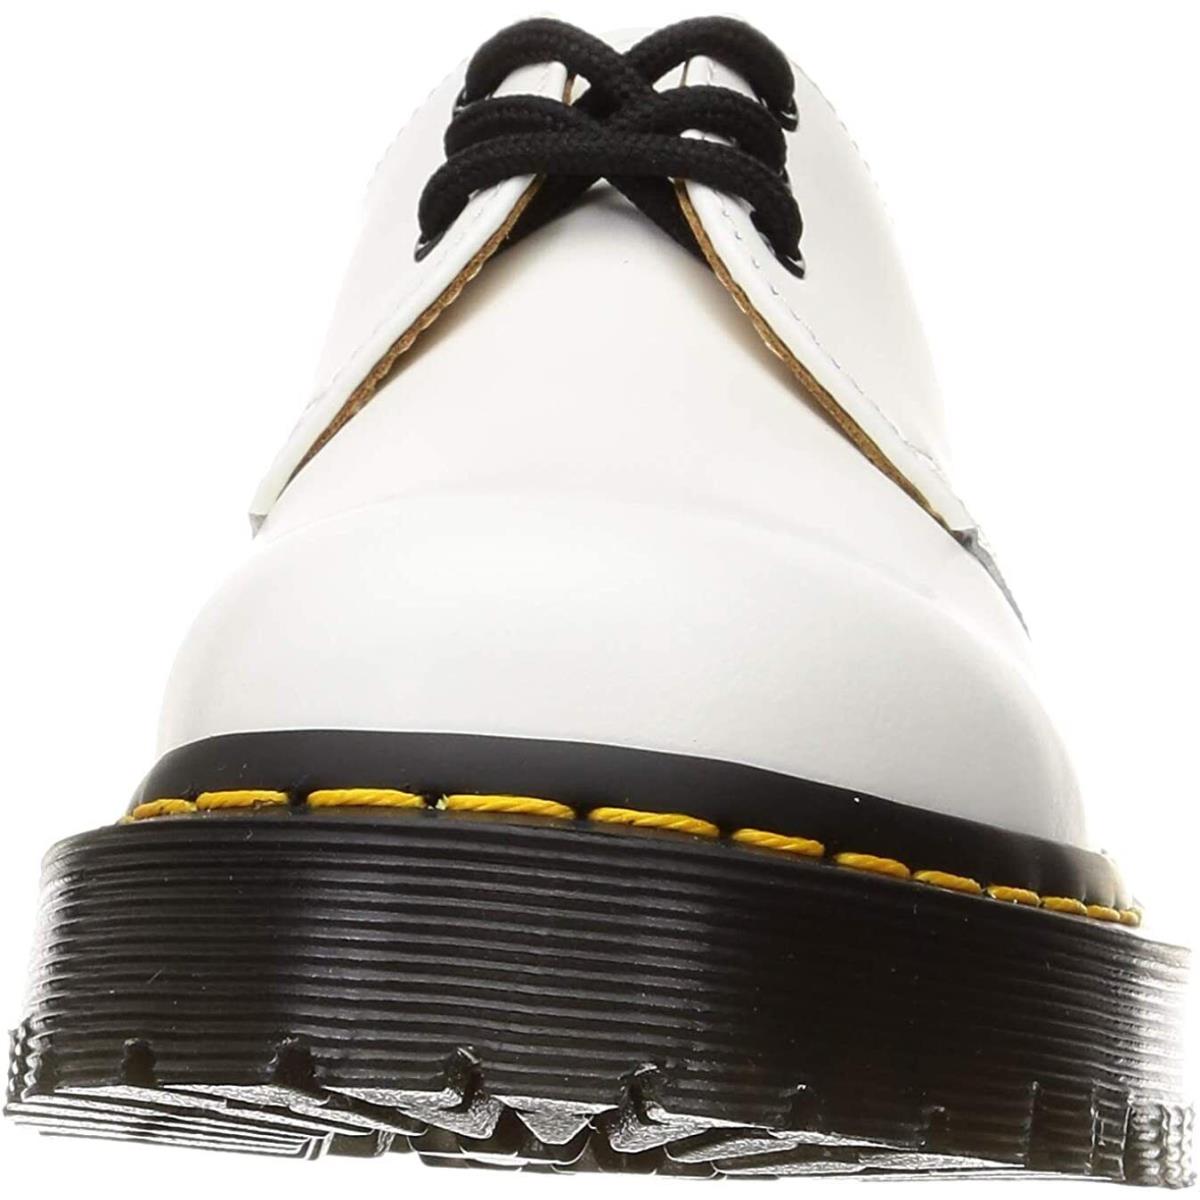 Dr. Martens 1461 Bex Shoes White Smooth - White Smooth